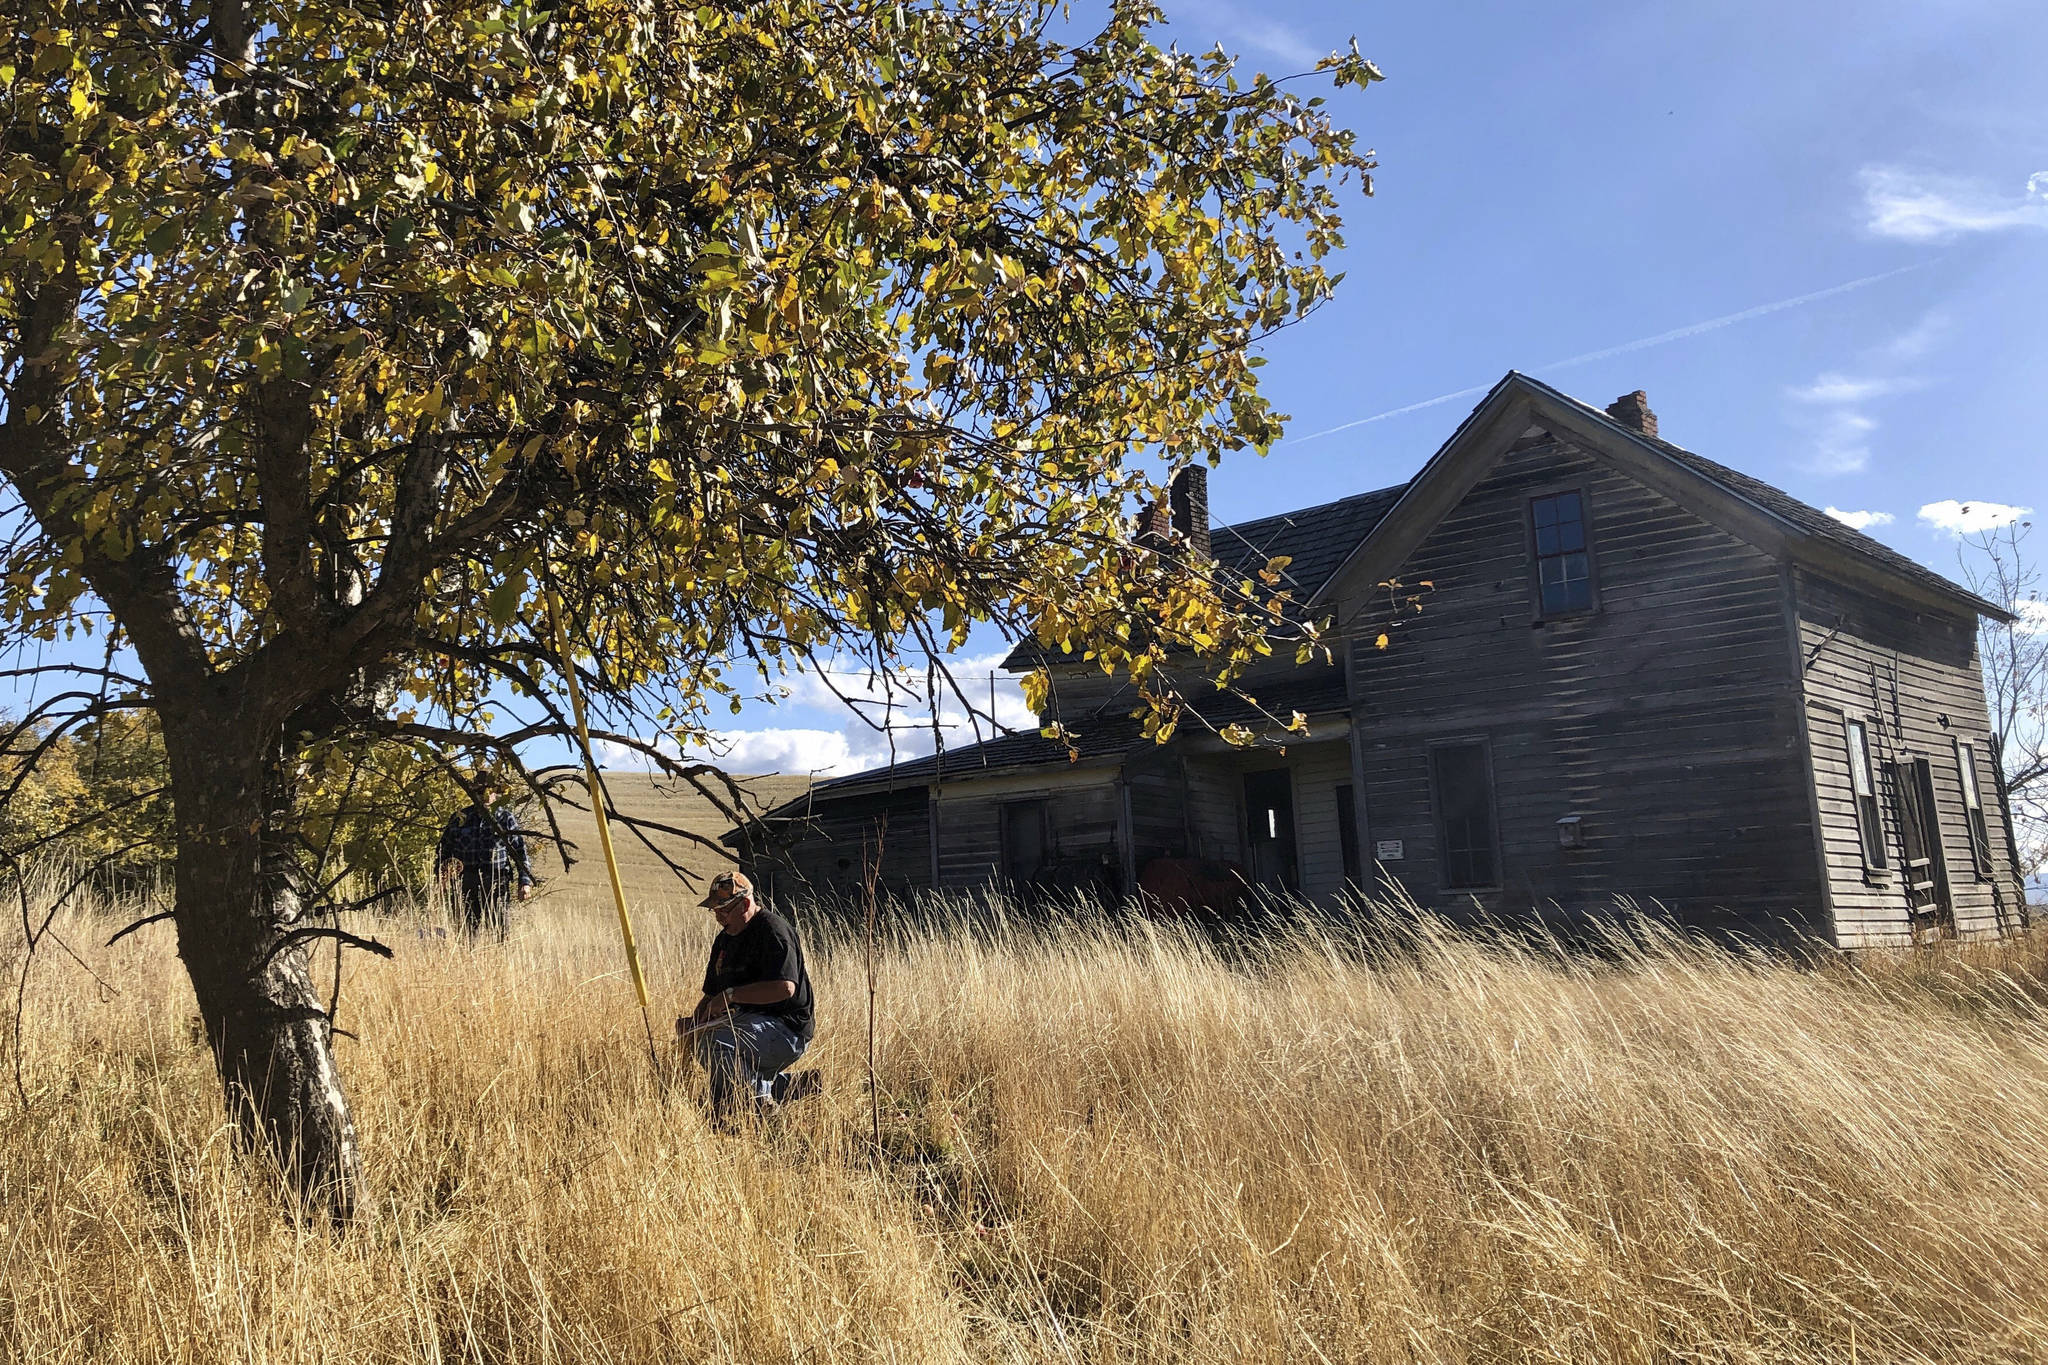 In this Oct. 23, 2019, photo, amateur botanist David Benscoter, of the Lost Apple Project, works in an orchard at an abandoned homestead near Genesee, Idaho. Benscoter and fellow amateur botanist EJ Brandt recently learned that their work in the fall of 2019 has led to the rediscovery of 10 apple varieties in the Pacific Northwest that were planted by long-ago pioneers and had been thought extinct. (AP Photo/Gillian Flaccus)